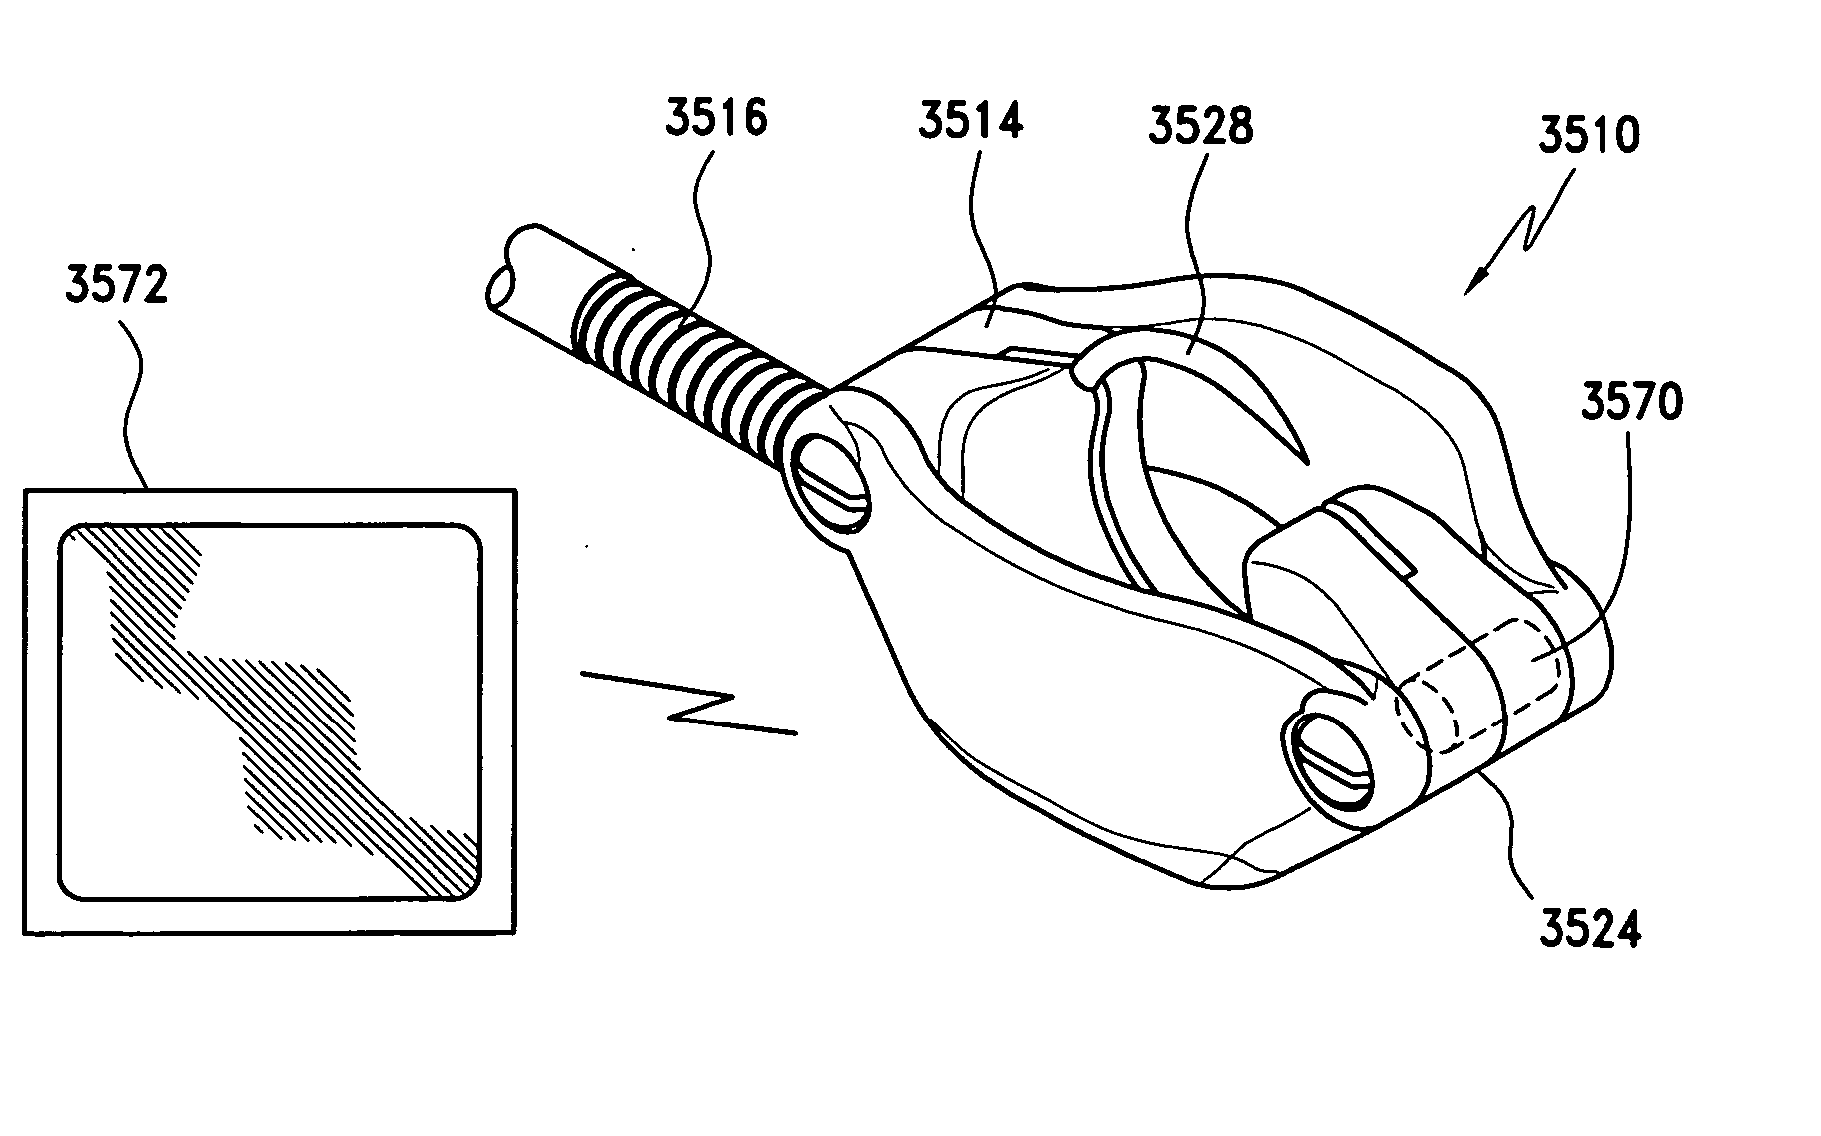 Surgical suturing apparatus with needle position indicator